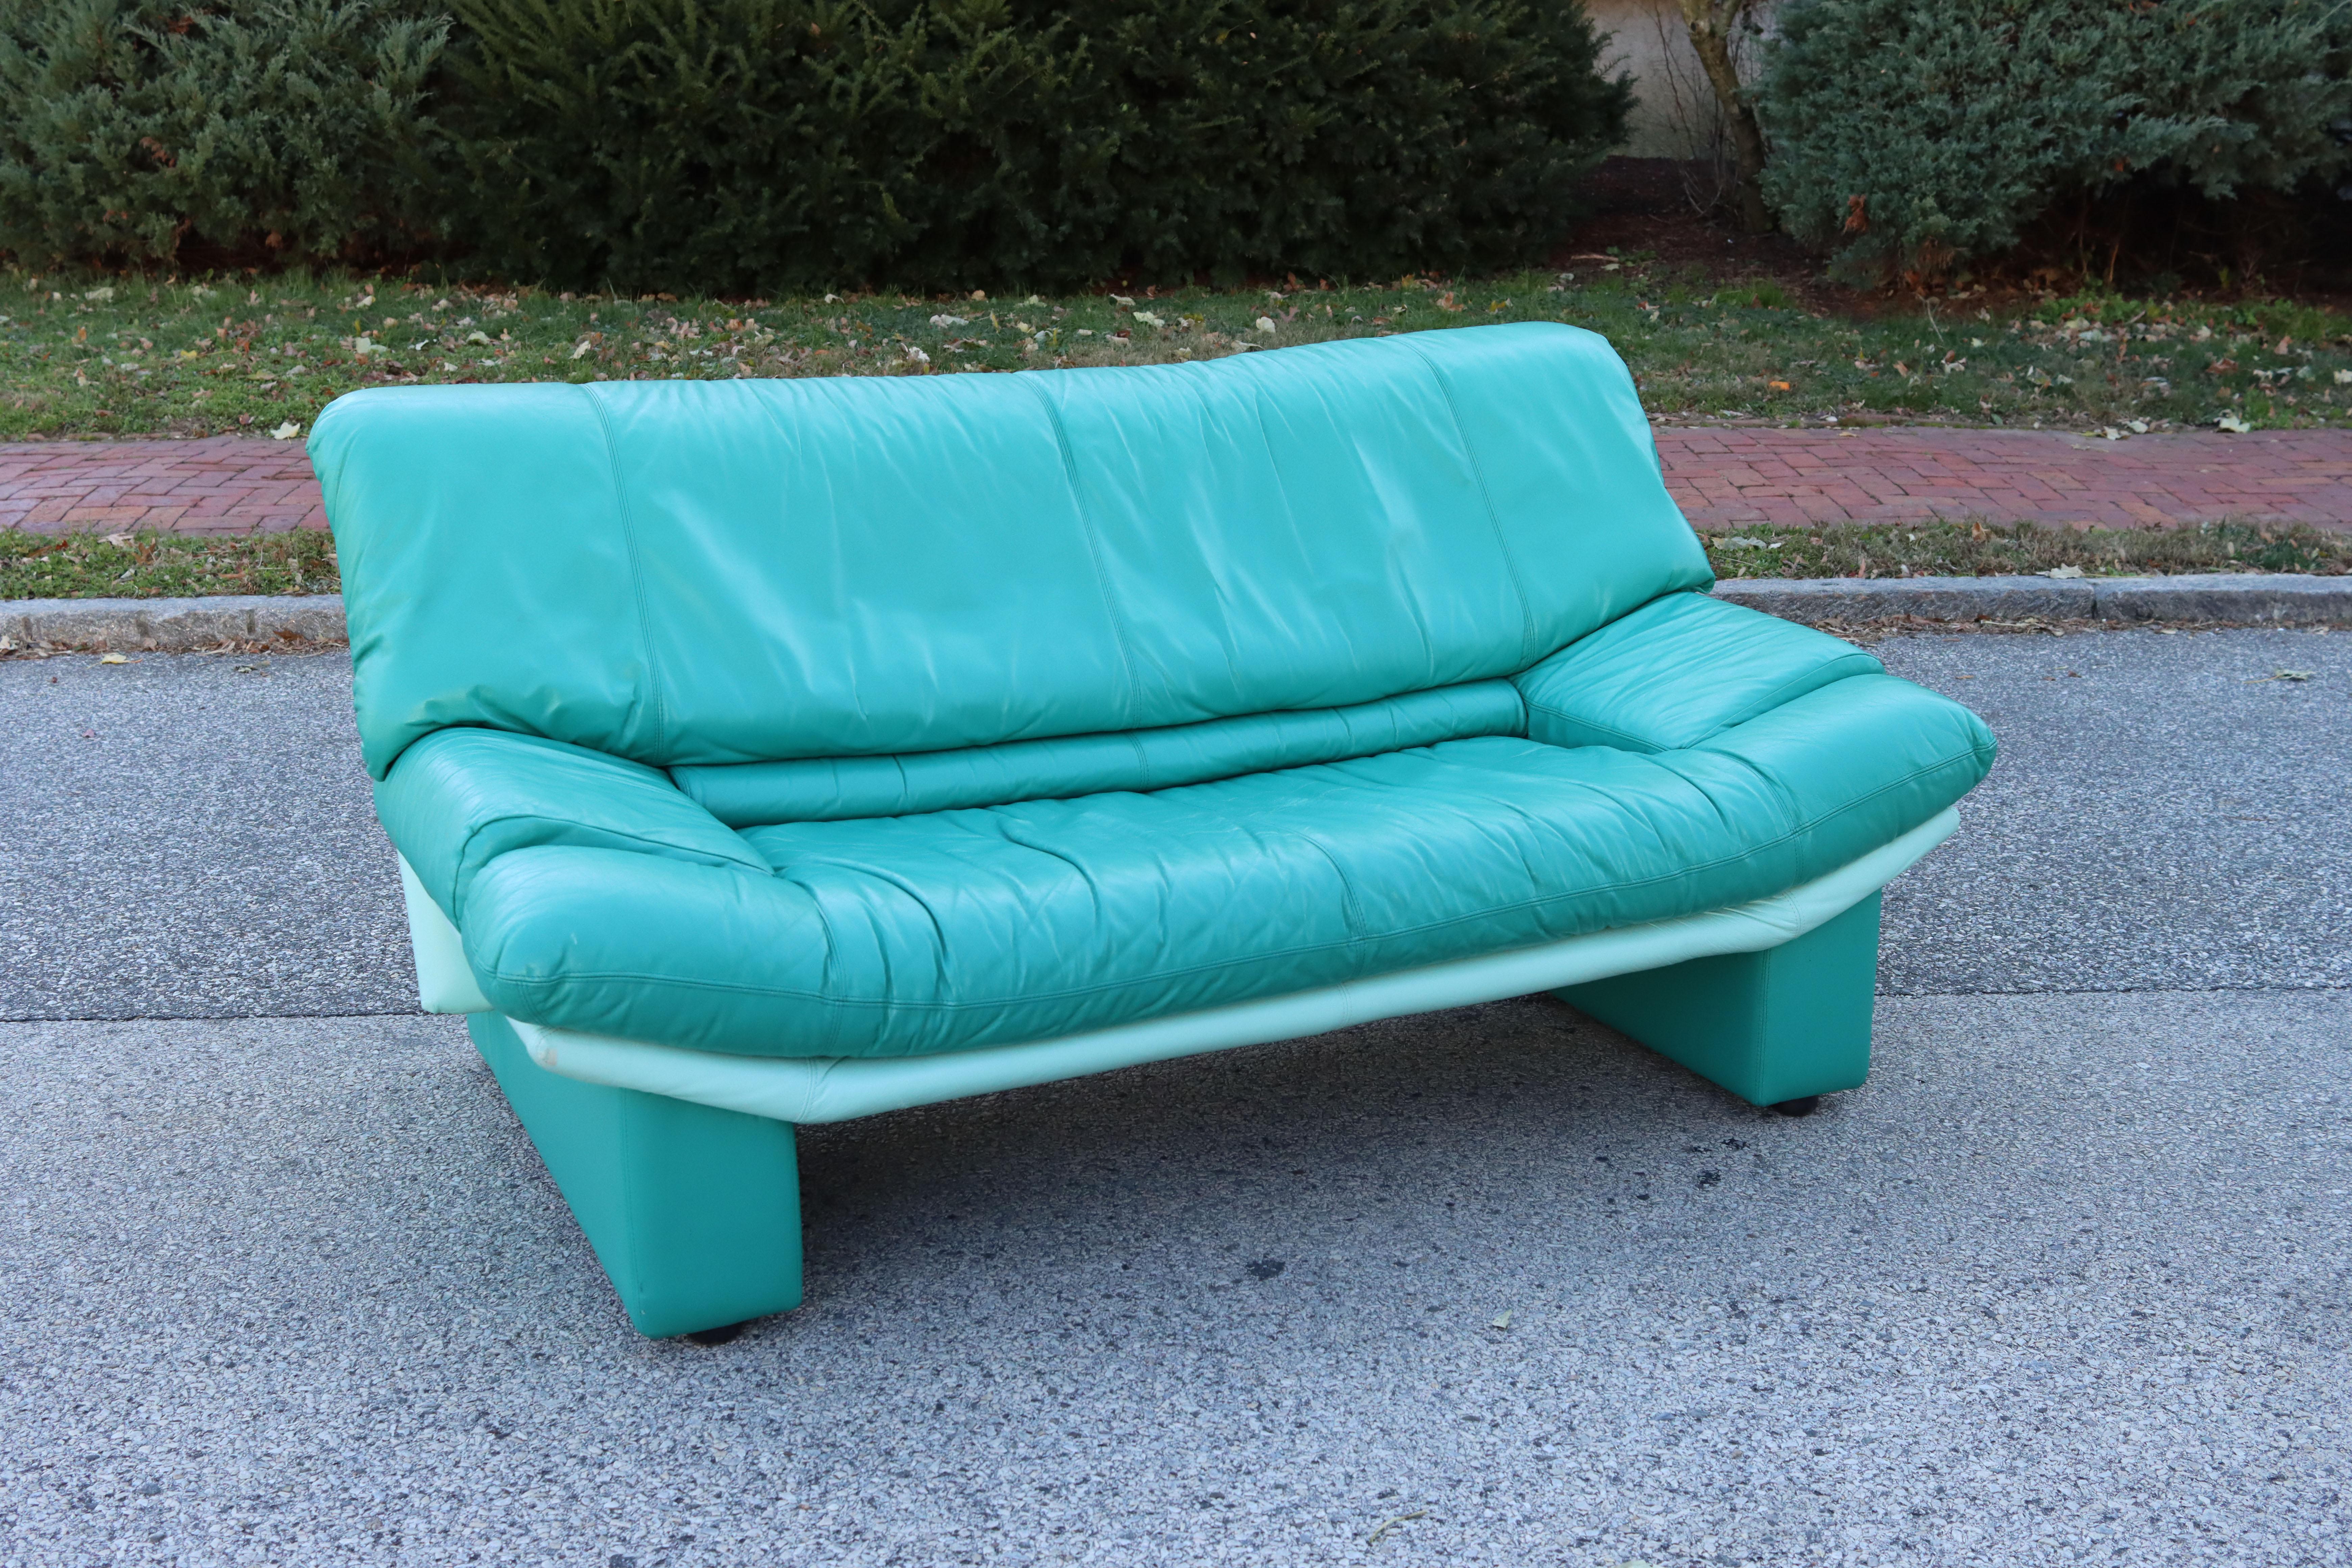 A vintage Alpa Salotti / Nicoletti loveseat sofa upholstered in vibrant teal leather. A brilliant pop of color to liven up your space. The leather is in excellent condition with no significant damage or wear. No dryness, cracking, or tears. Interior